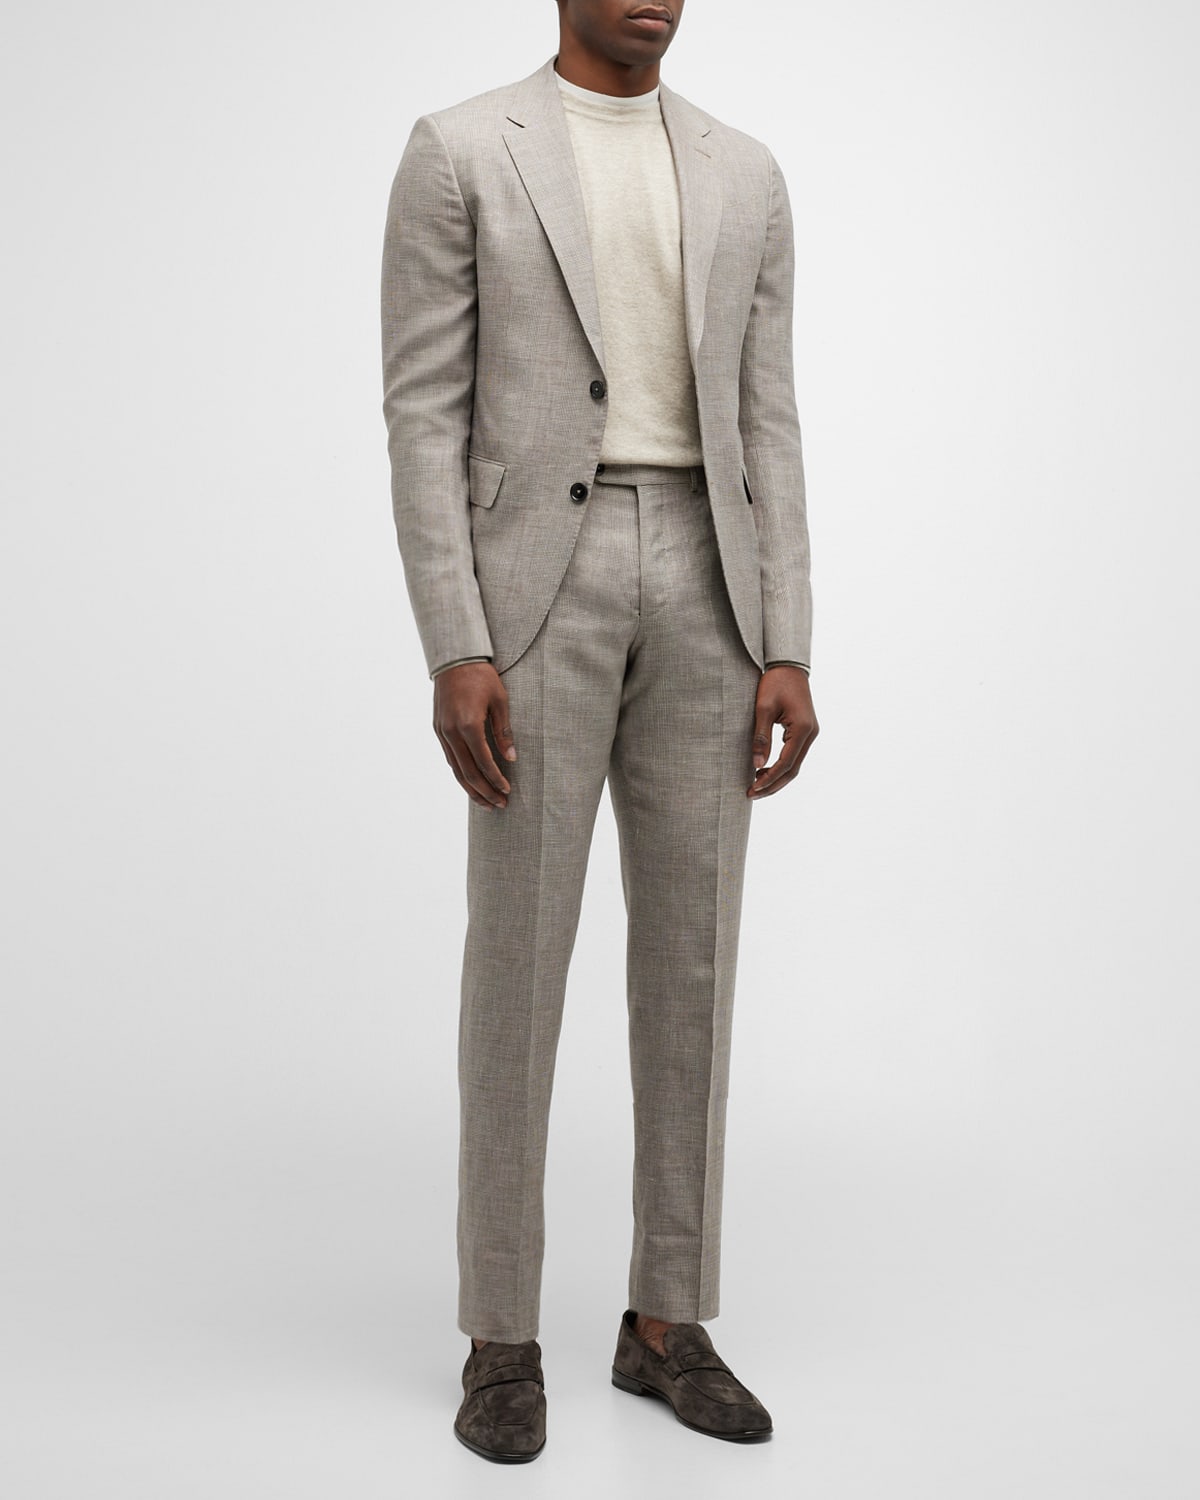 TOM FORD Men's O'Connor Prince of Wales Suit | Neiman Marcus